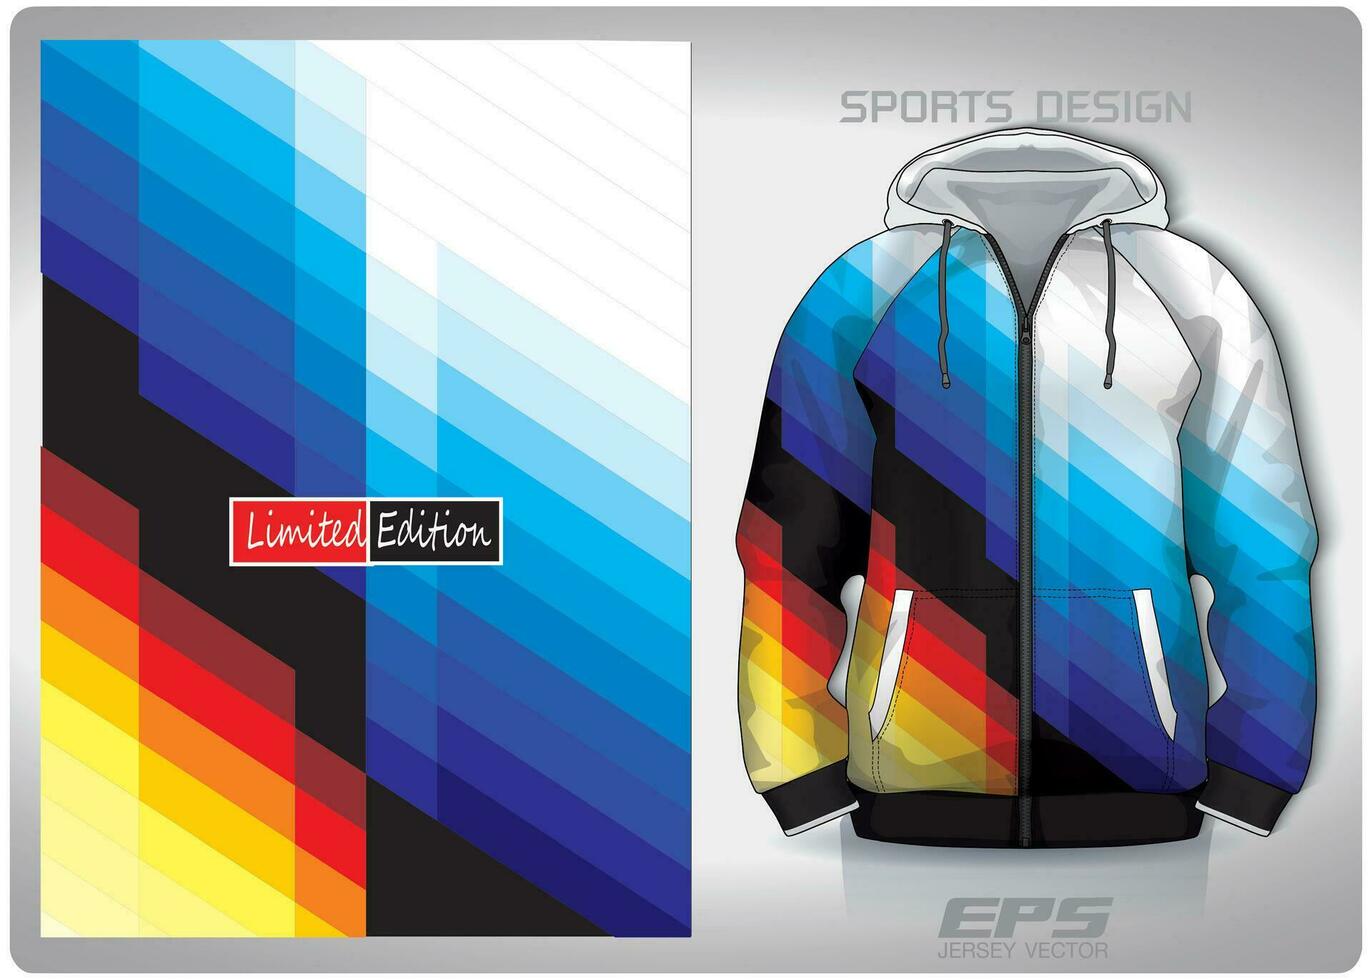 Vector sports shirt background image.Yellow black blue gradient reflection pattern design, illustration, textile background for sports long sleeve hoodie, jersey hoodie